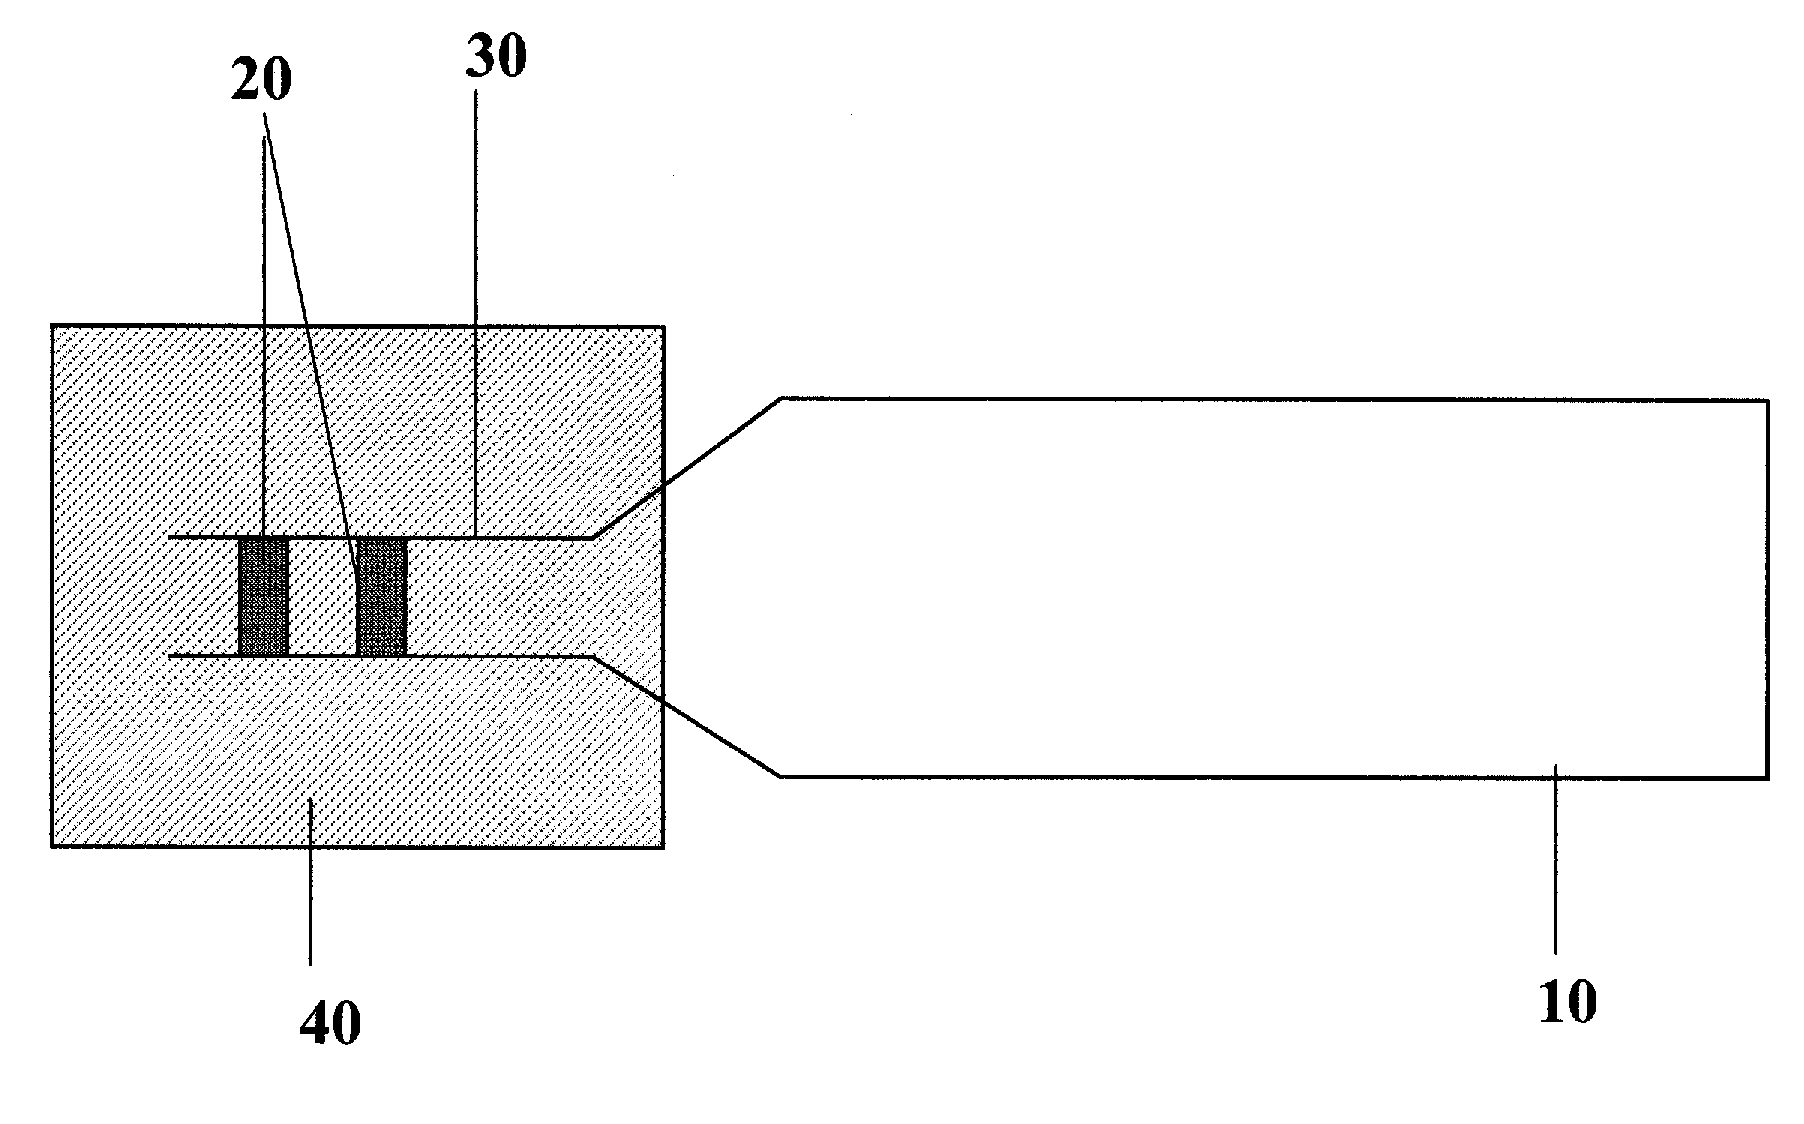 Capillary system for controlling the flow rate of fluids